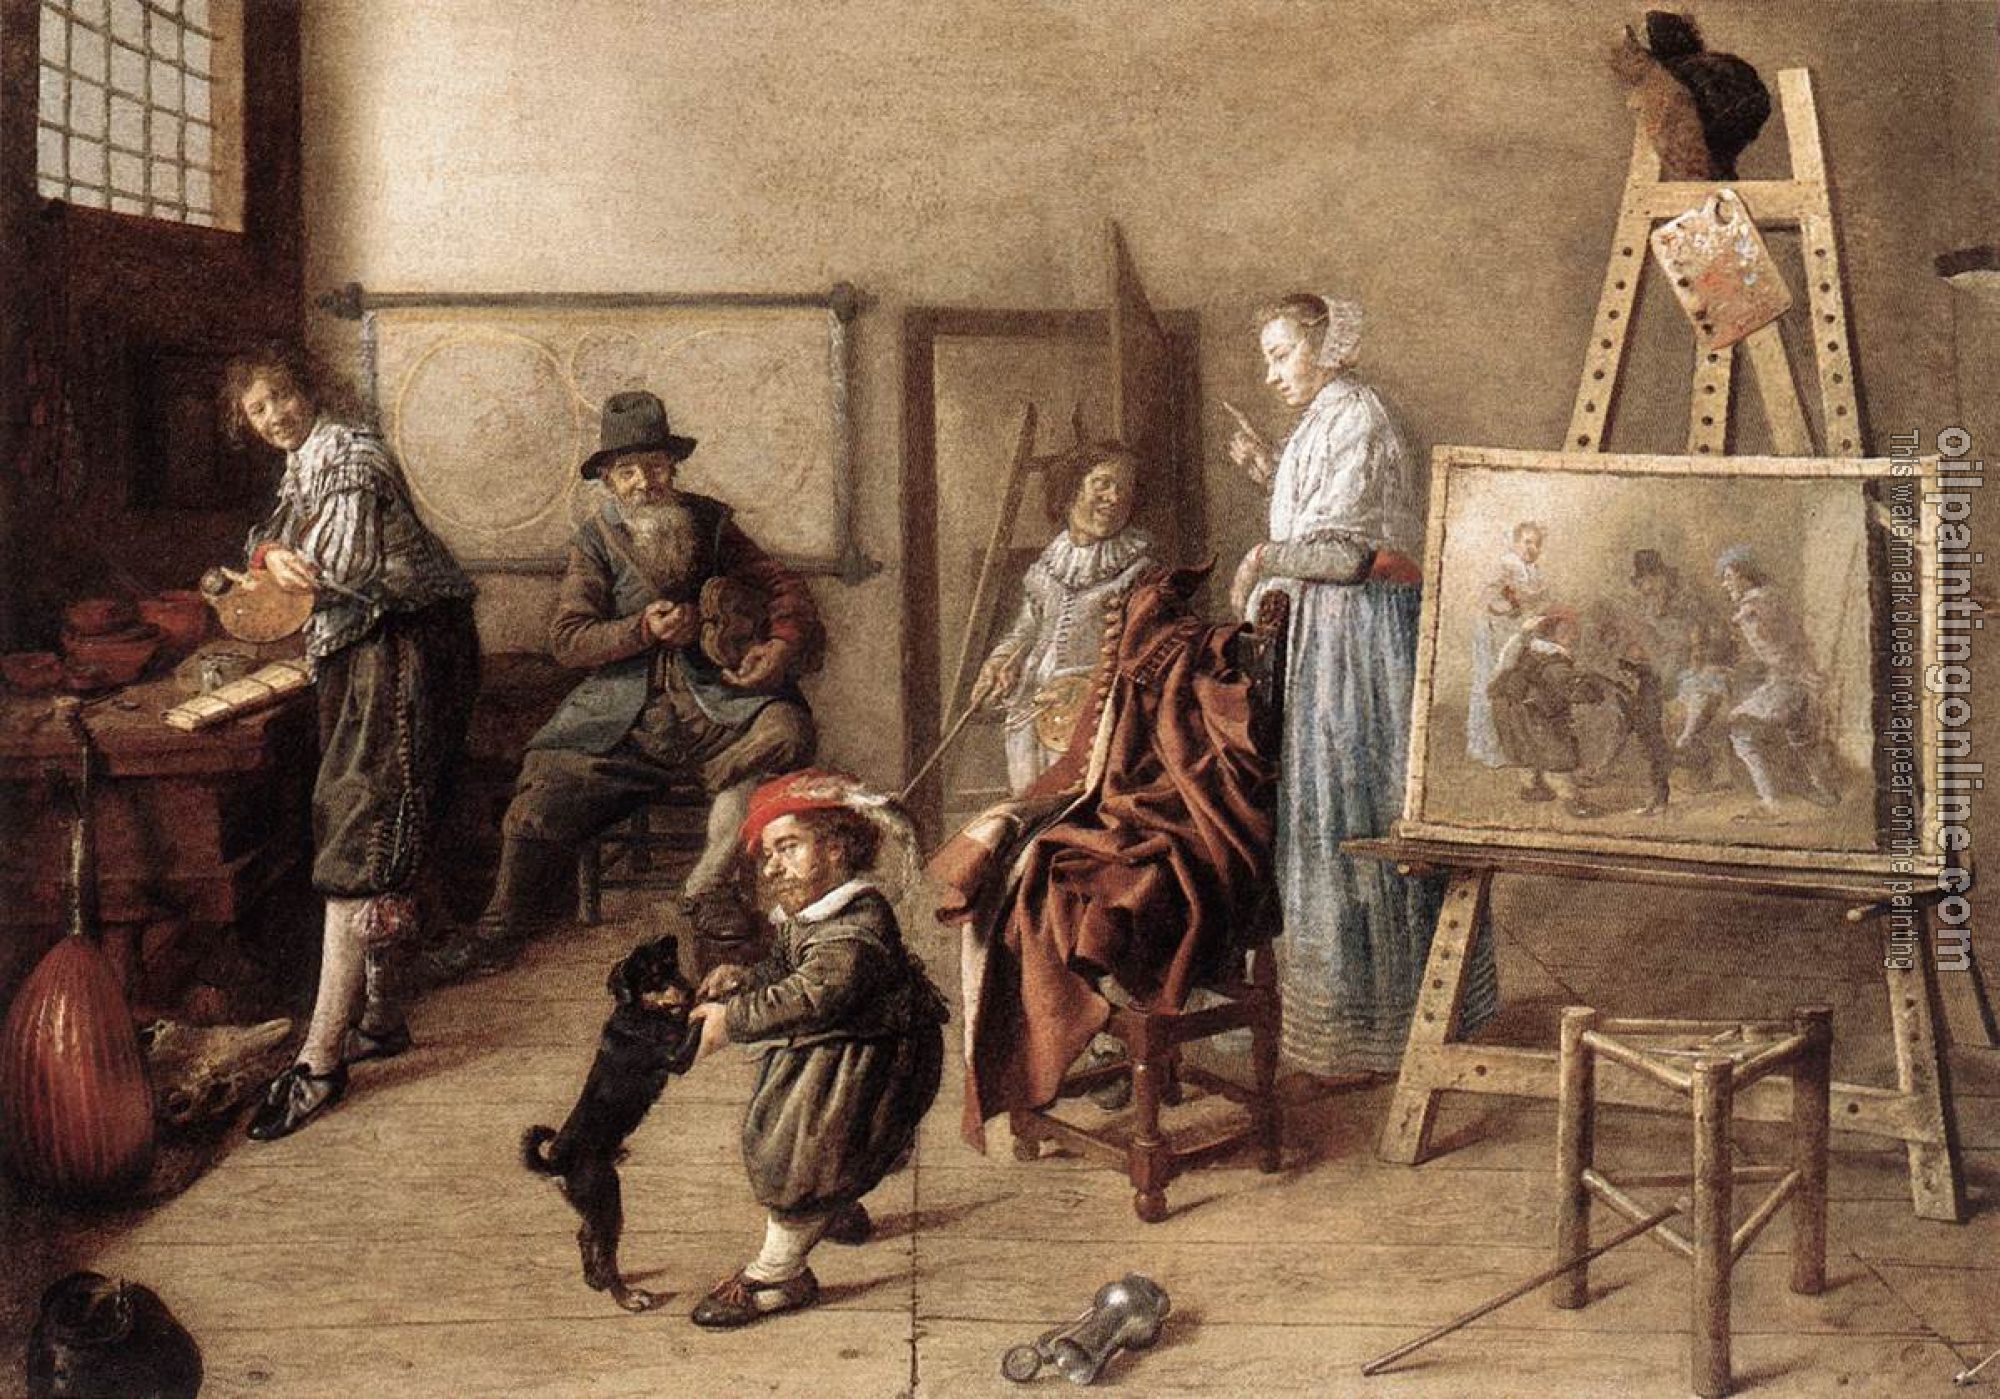 Molenaer, Jan Miense - Painter in His Studio, Painting a Musical Company